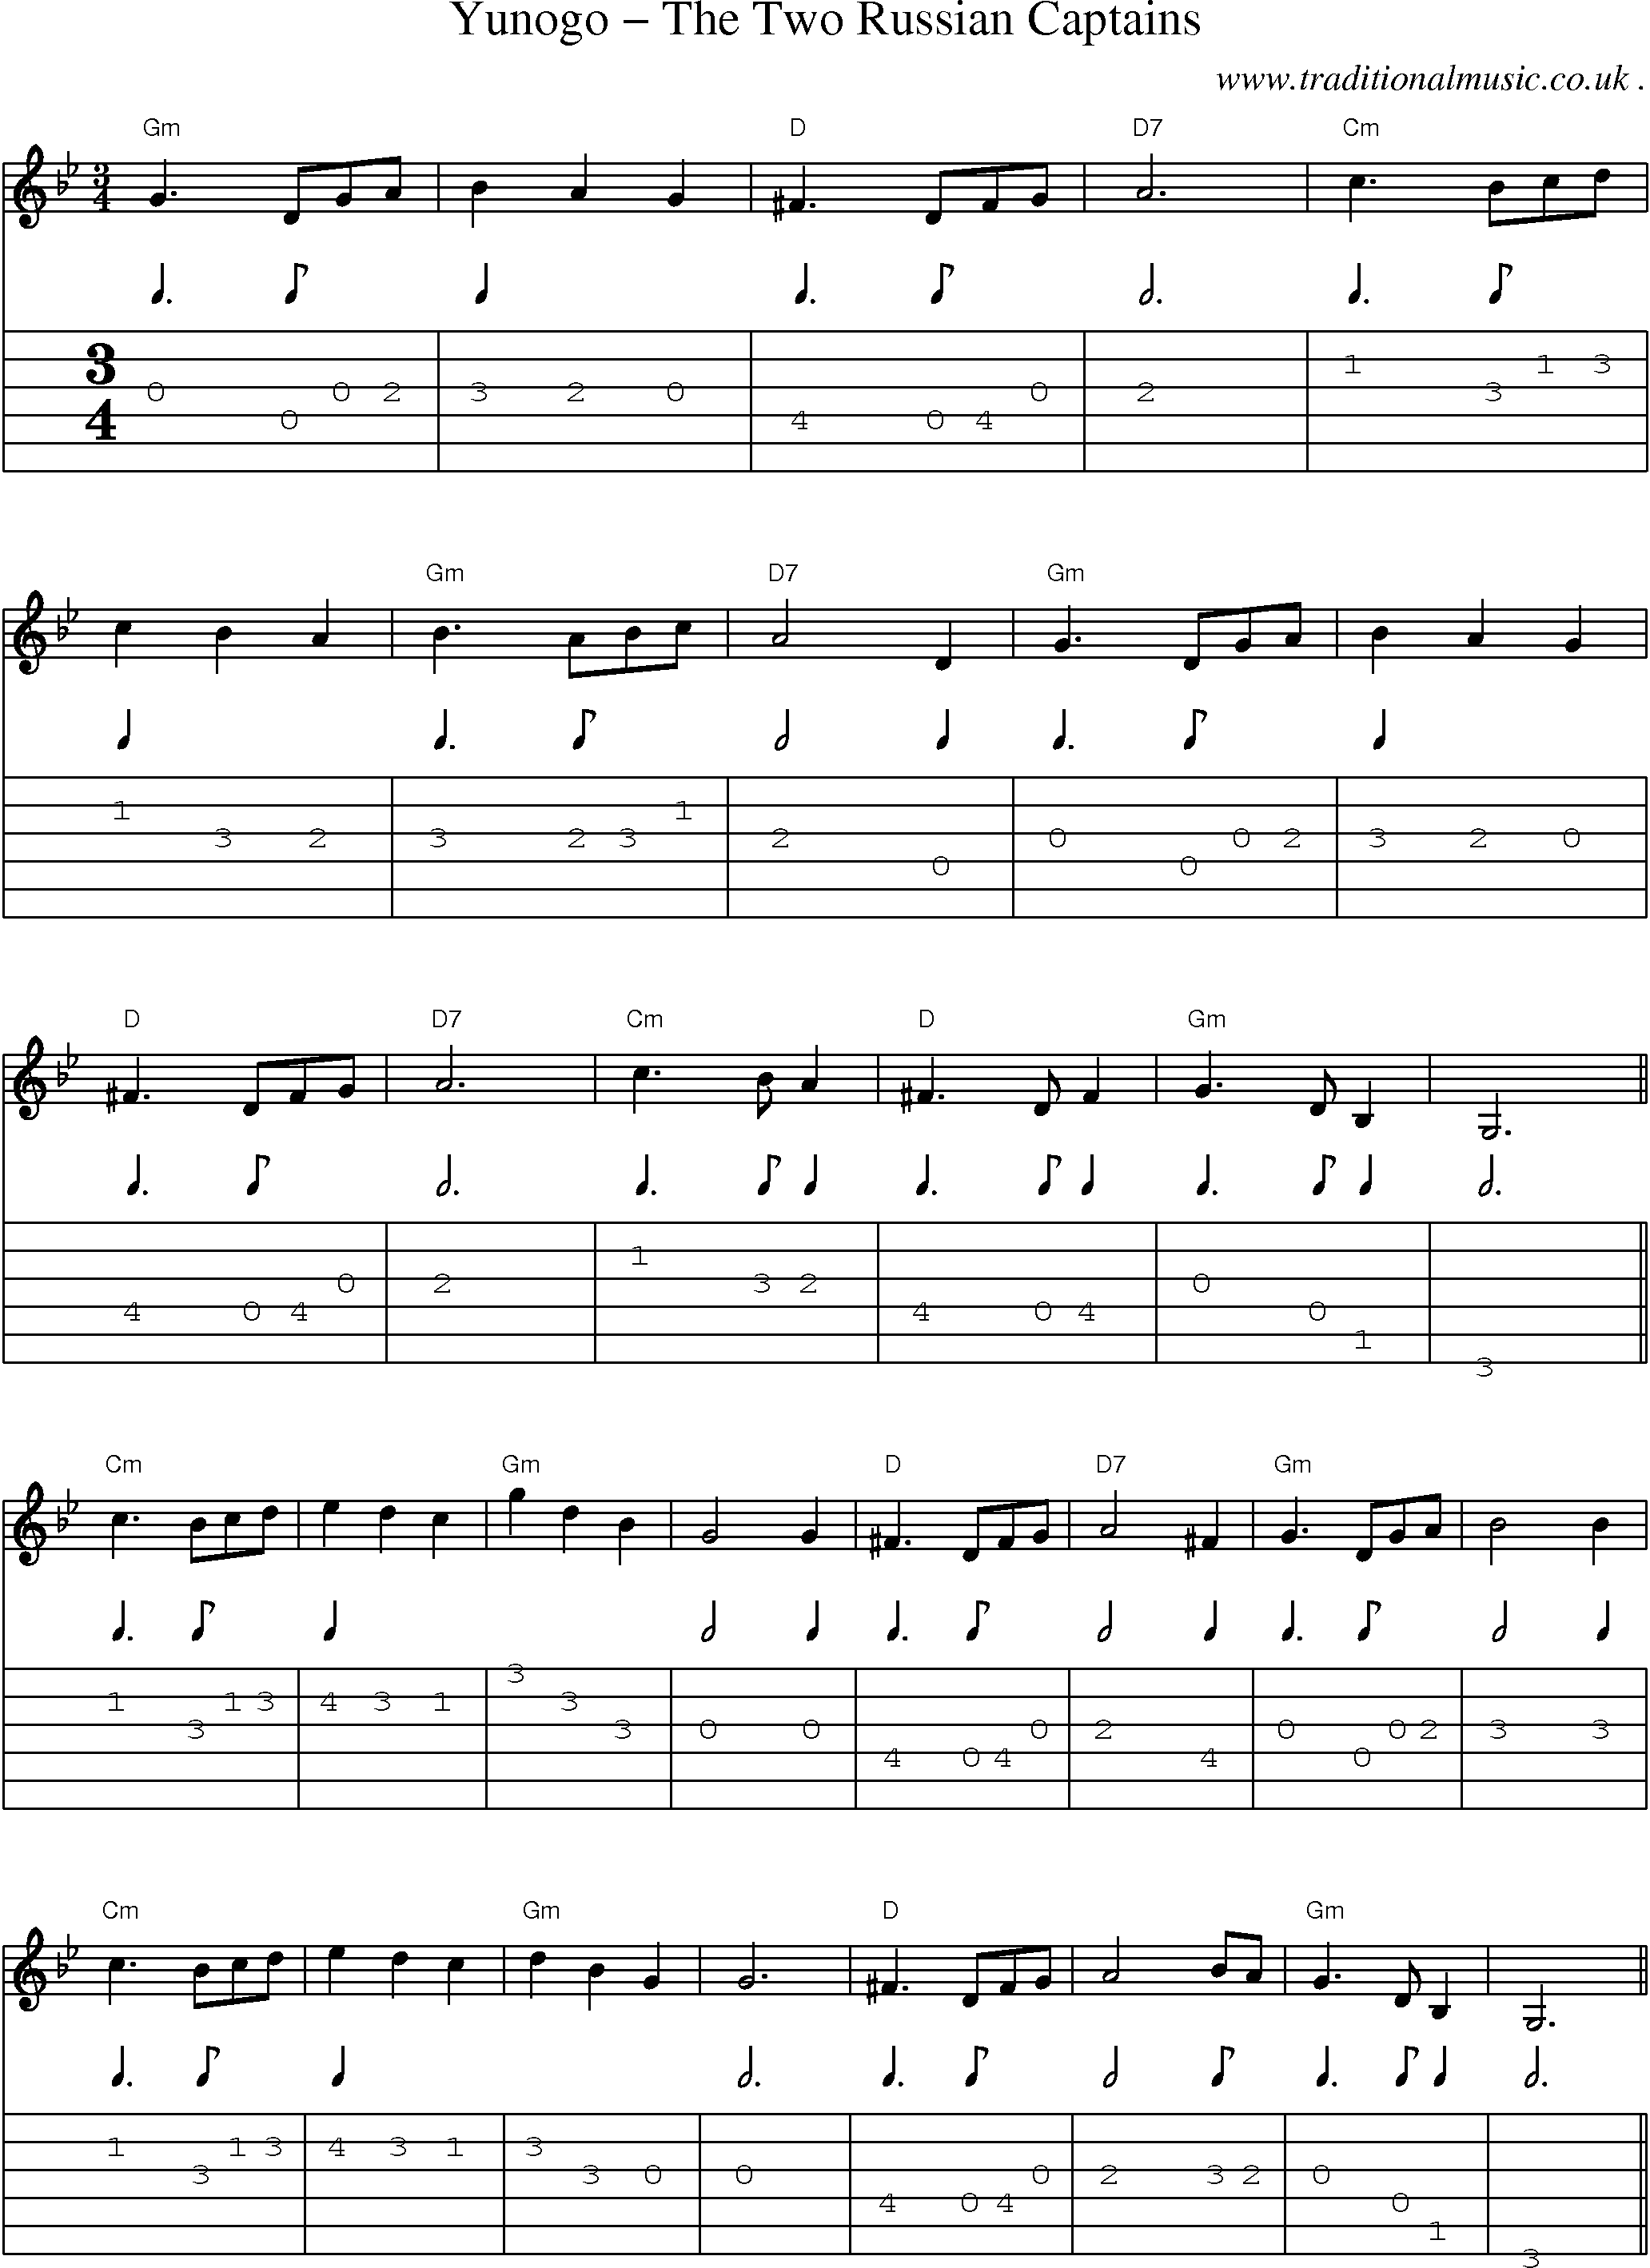 Music Score and Guitar Tabs for Yunogo The Two Russian Captains